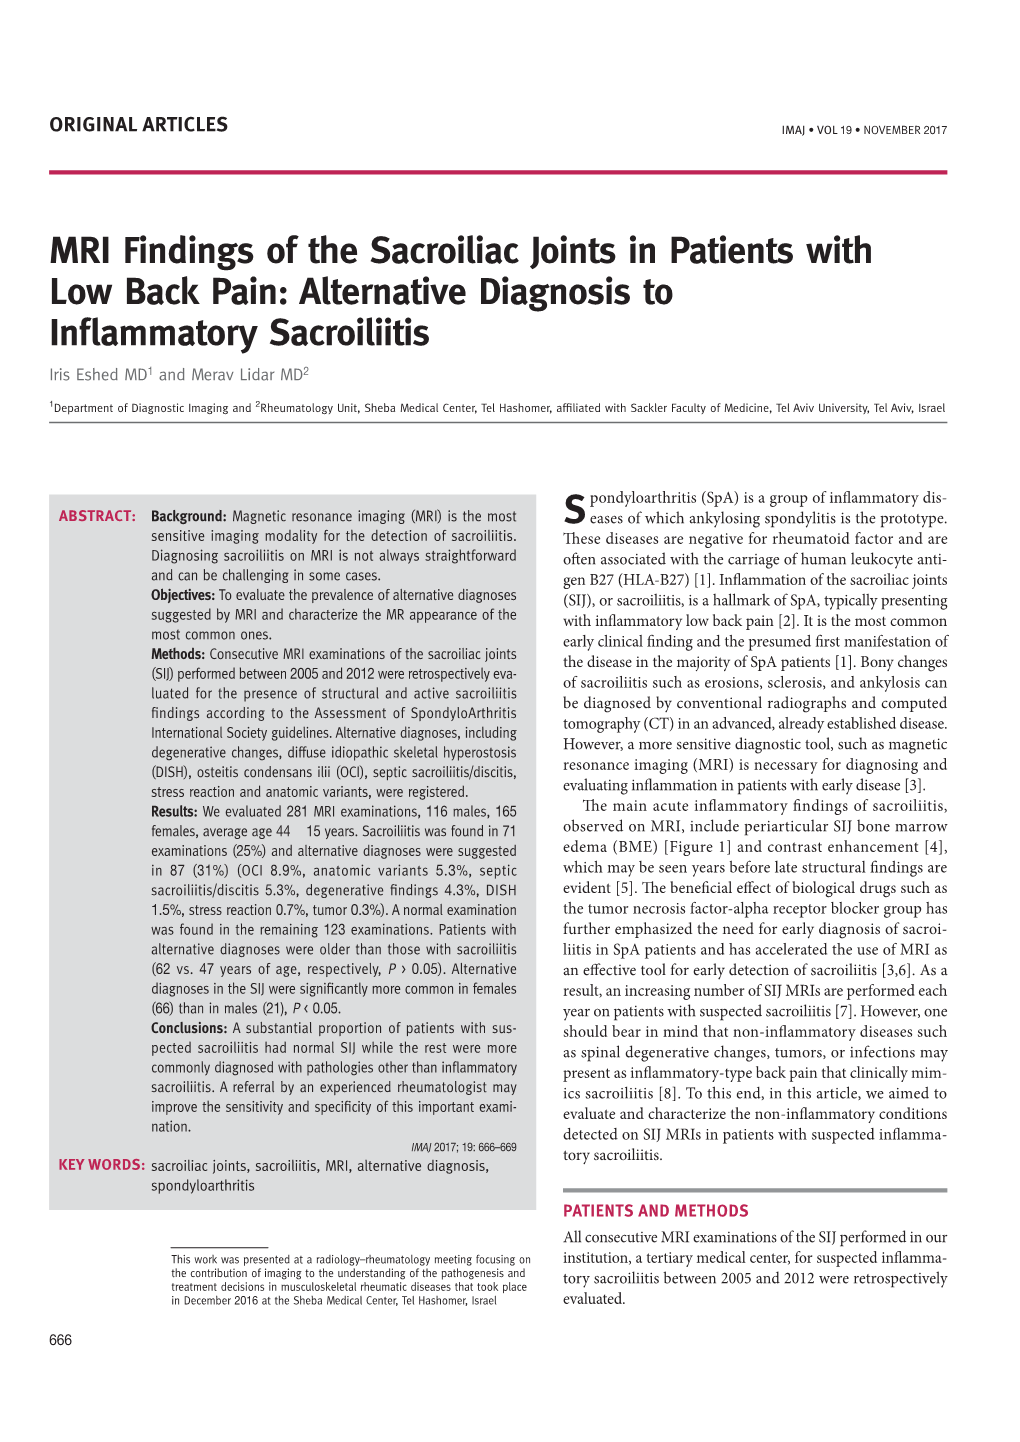 MRI Findings of the Sacroiliac Joints in Patients with Low Back Pain: Alternative Diagnosis to Inﬂammatory Sacroiliitis Iris Eshed MD1 and Merav Lidar MD2